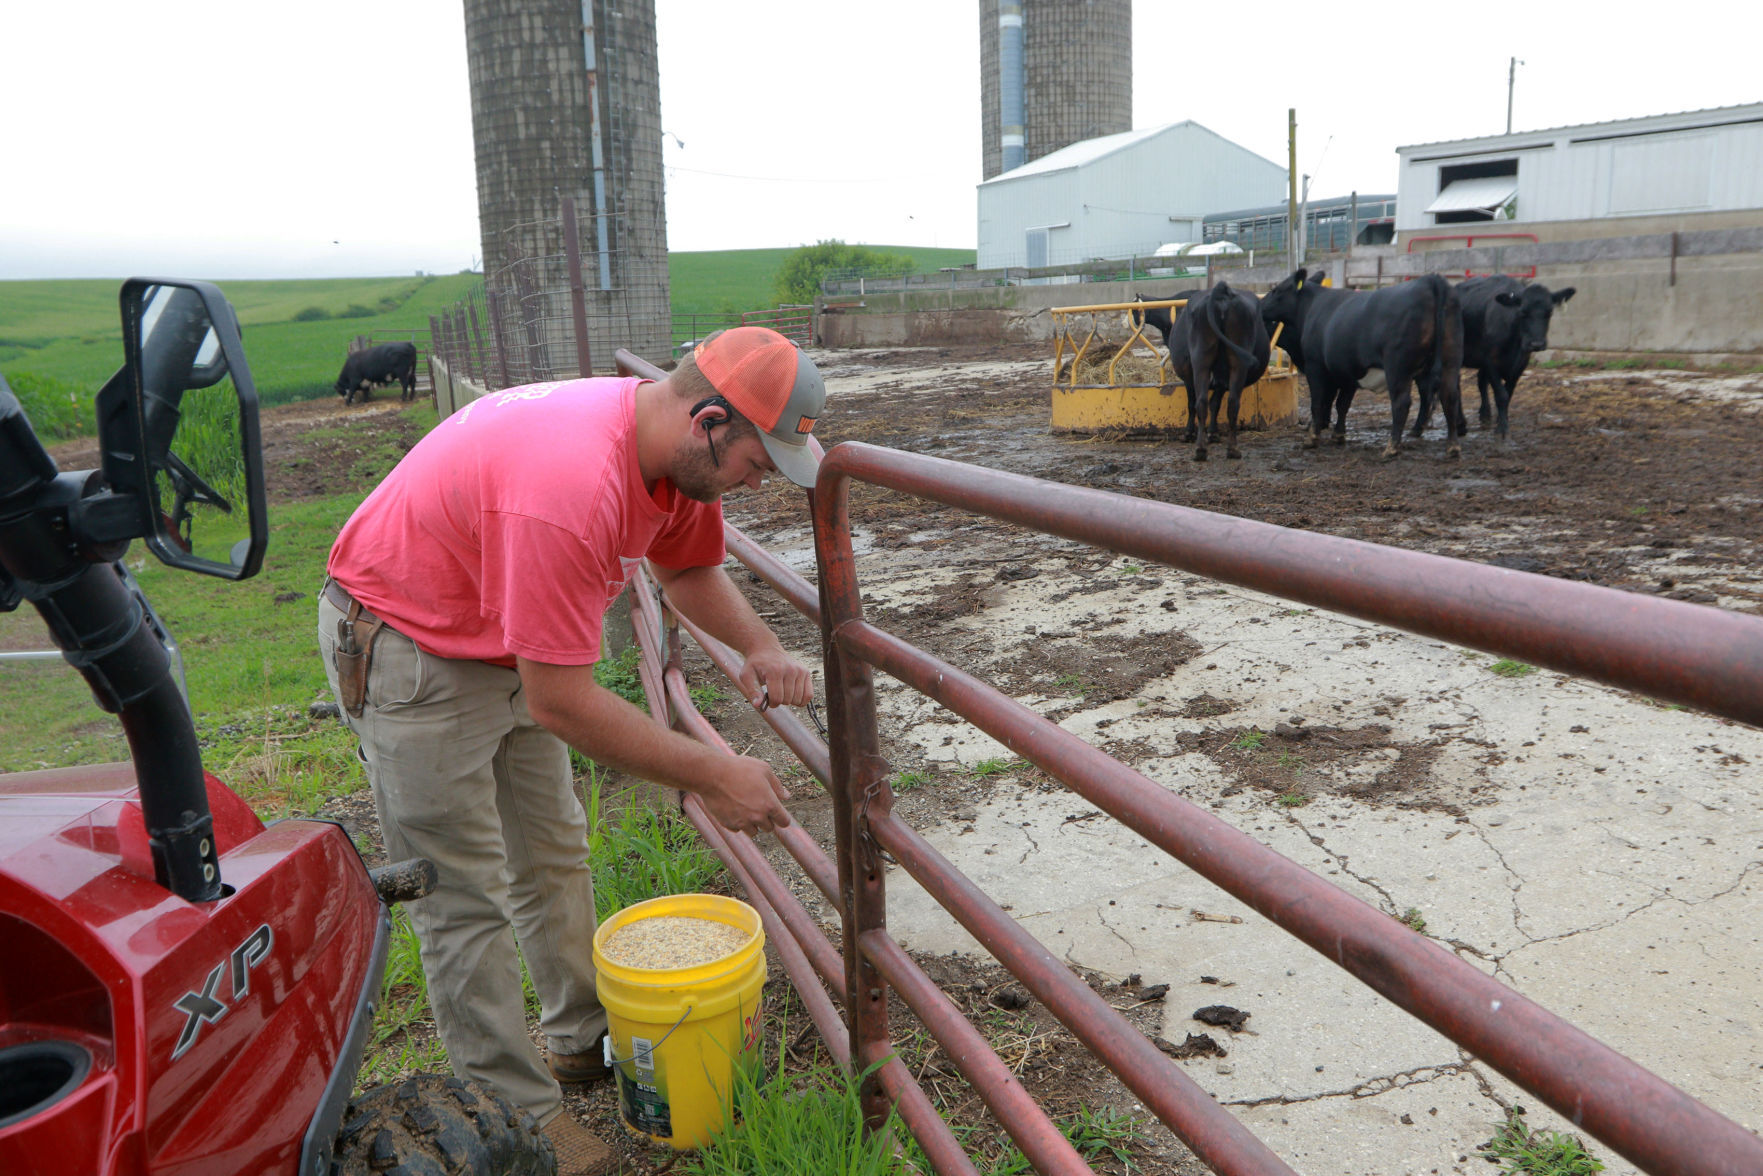 Dylan Hoefler feeds the cows at his family farm in New Vienna, Iowa. PHOTO CREDIT: Katie Goodale